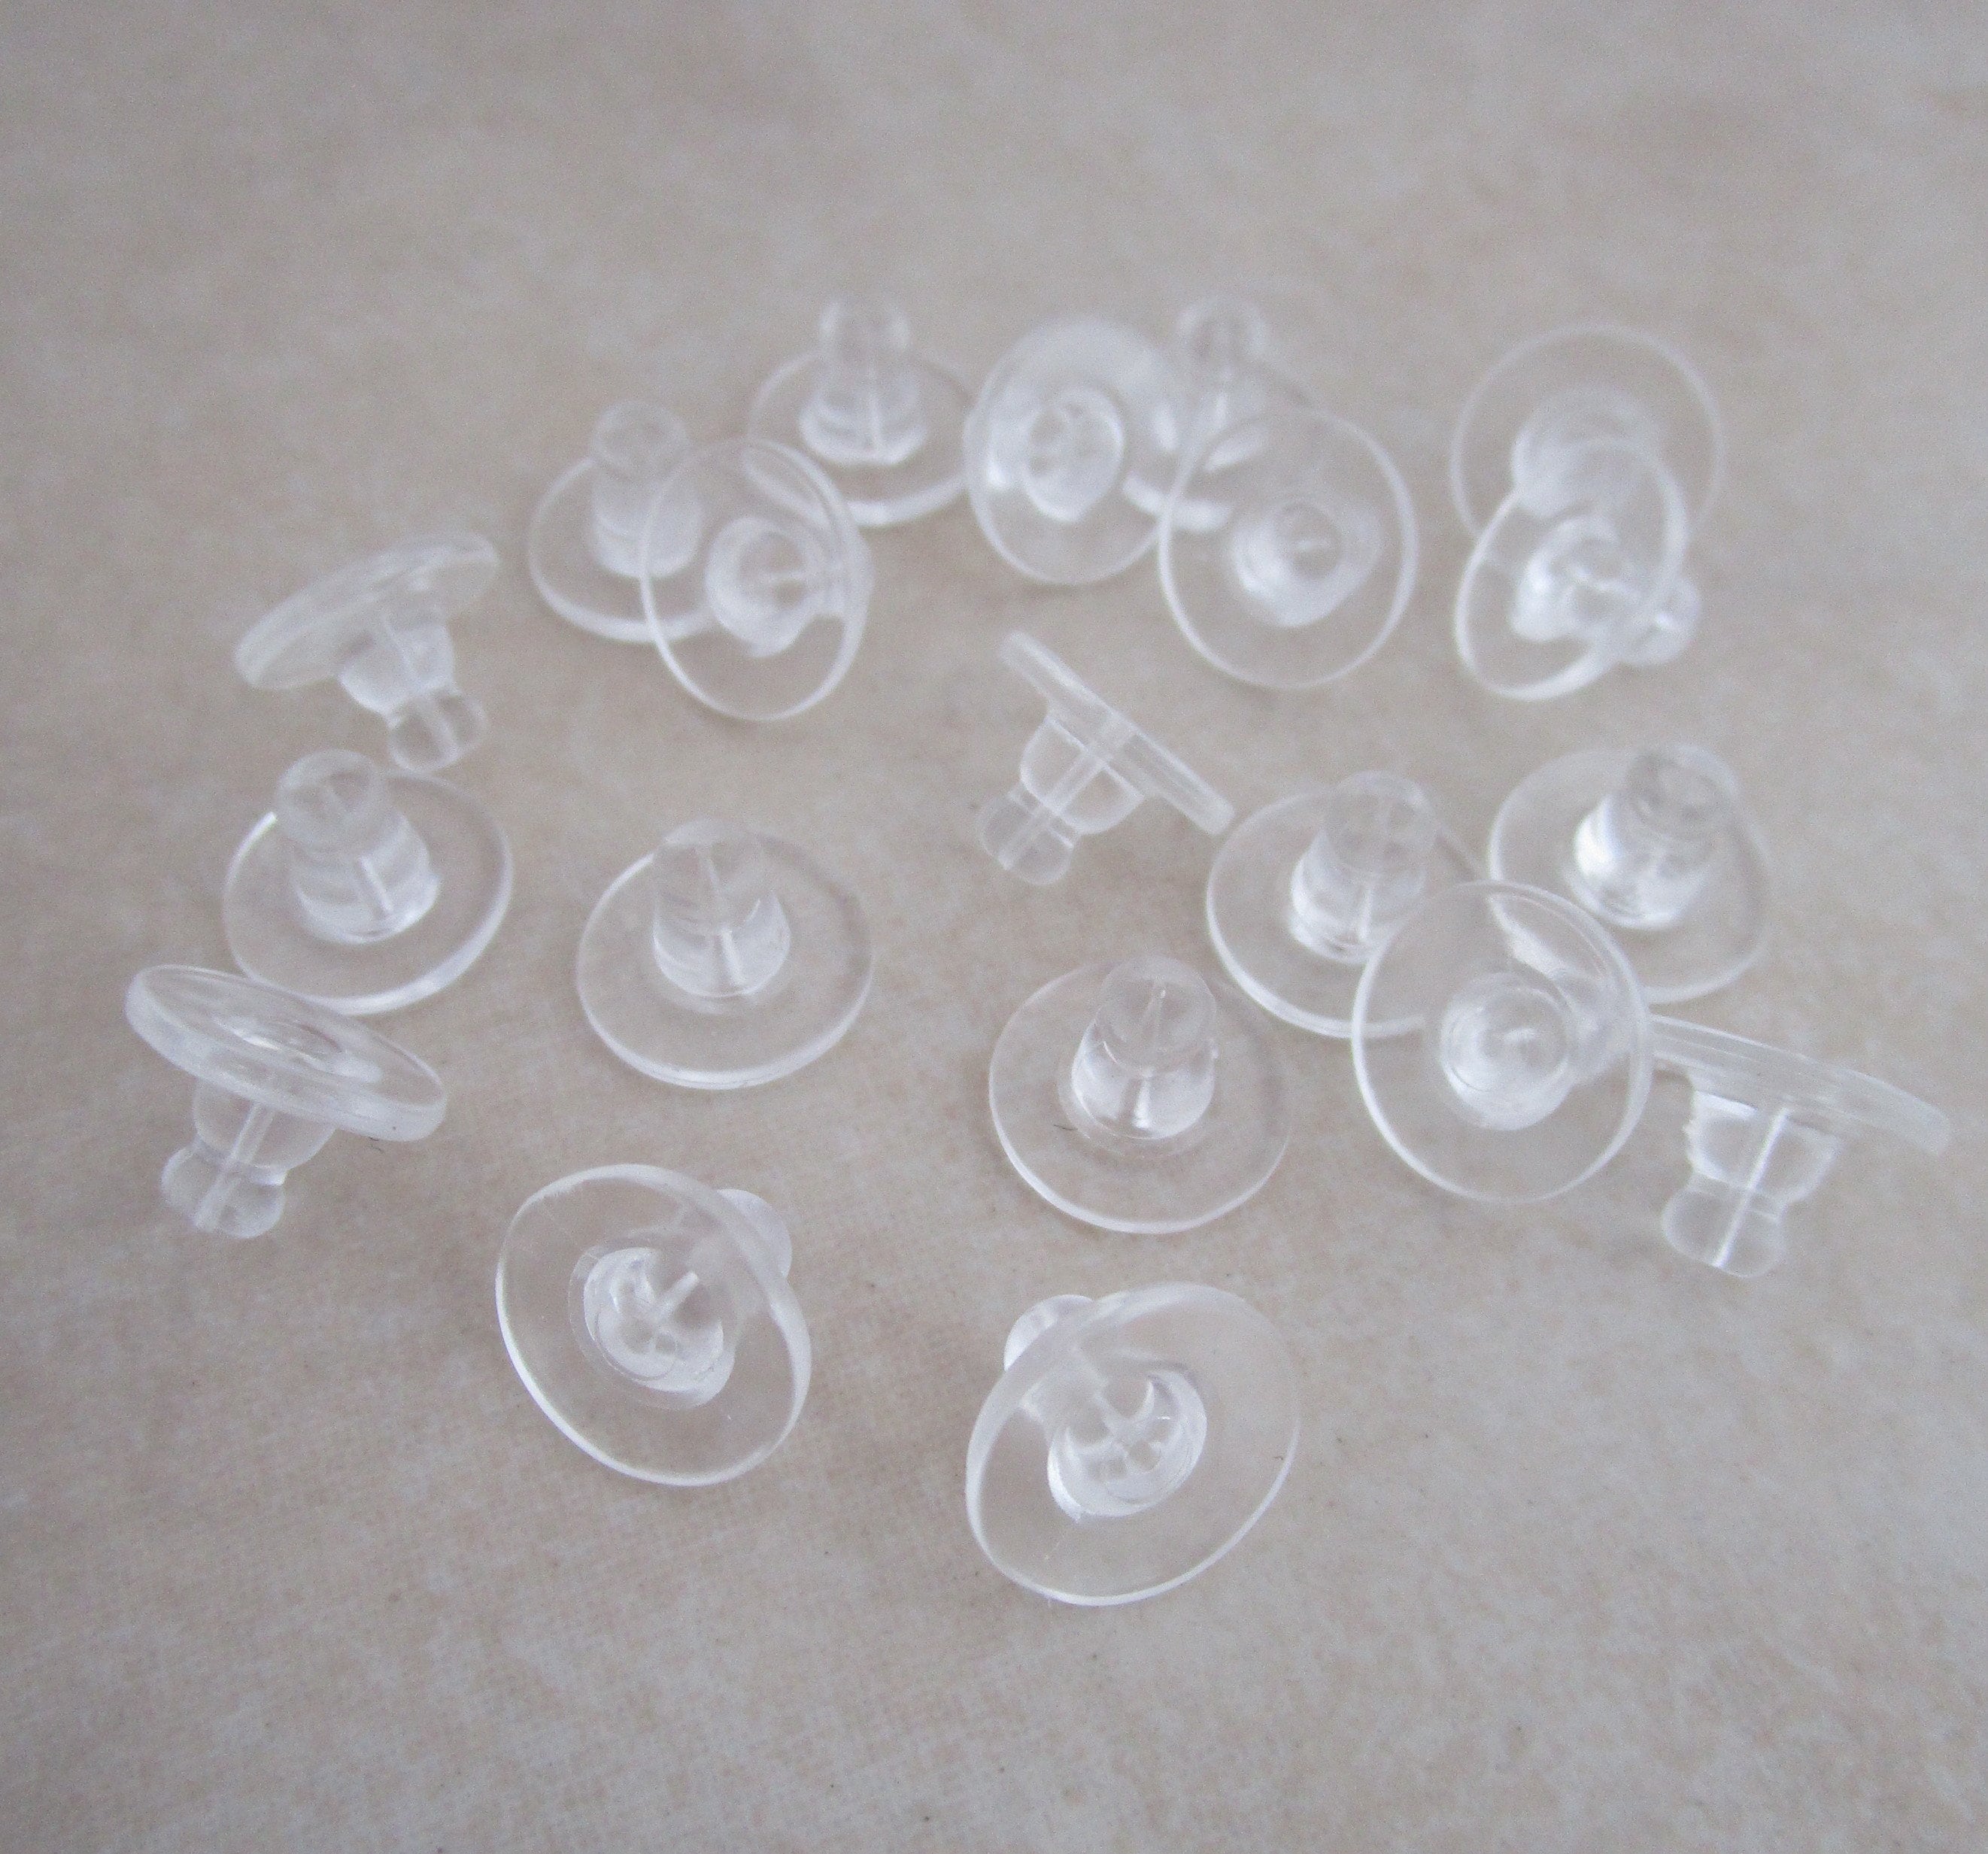 100pcs Silicone Earring Backs Clear Soft Rubber Ear Stud Blocked Stoppers  10mm